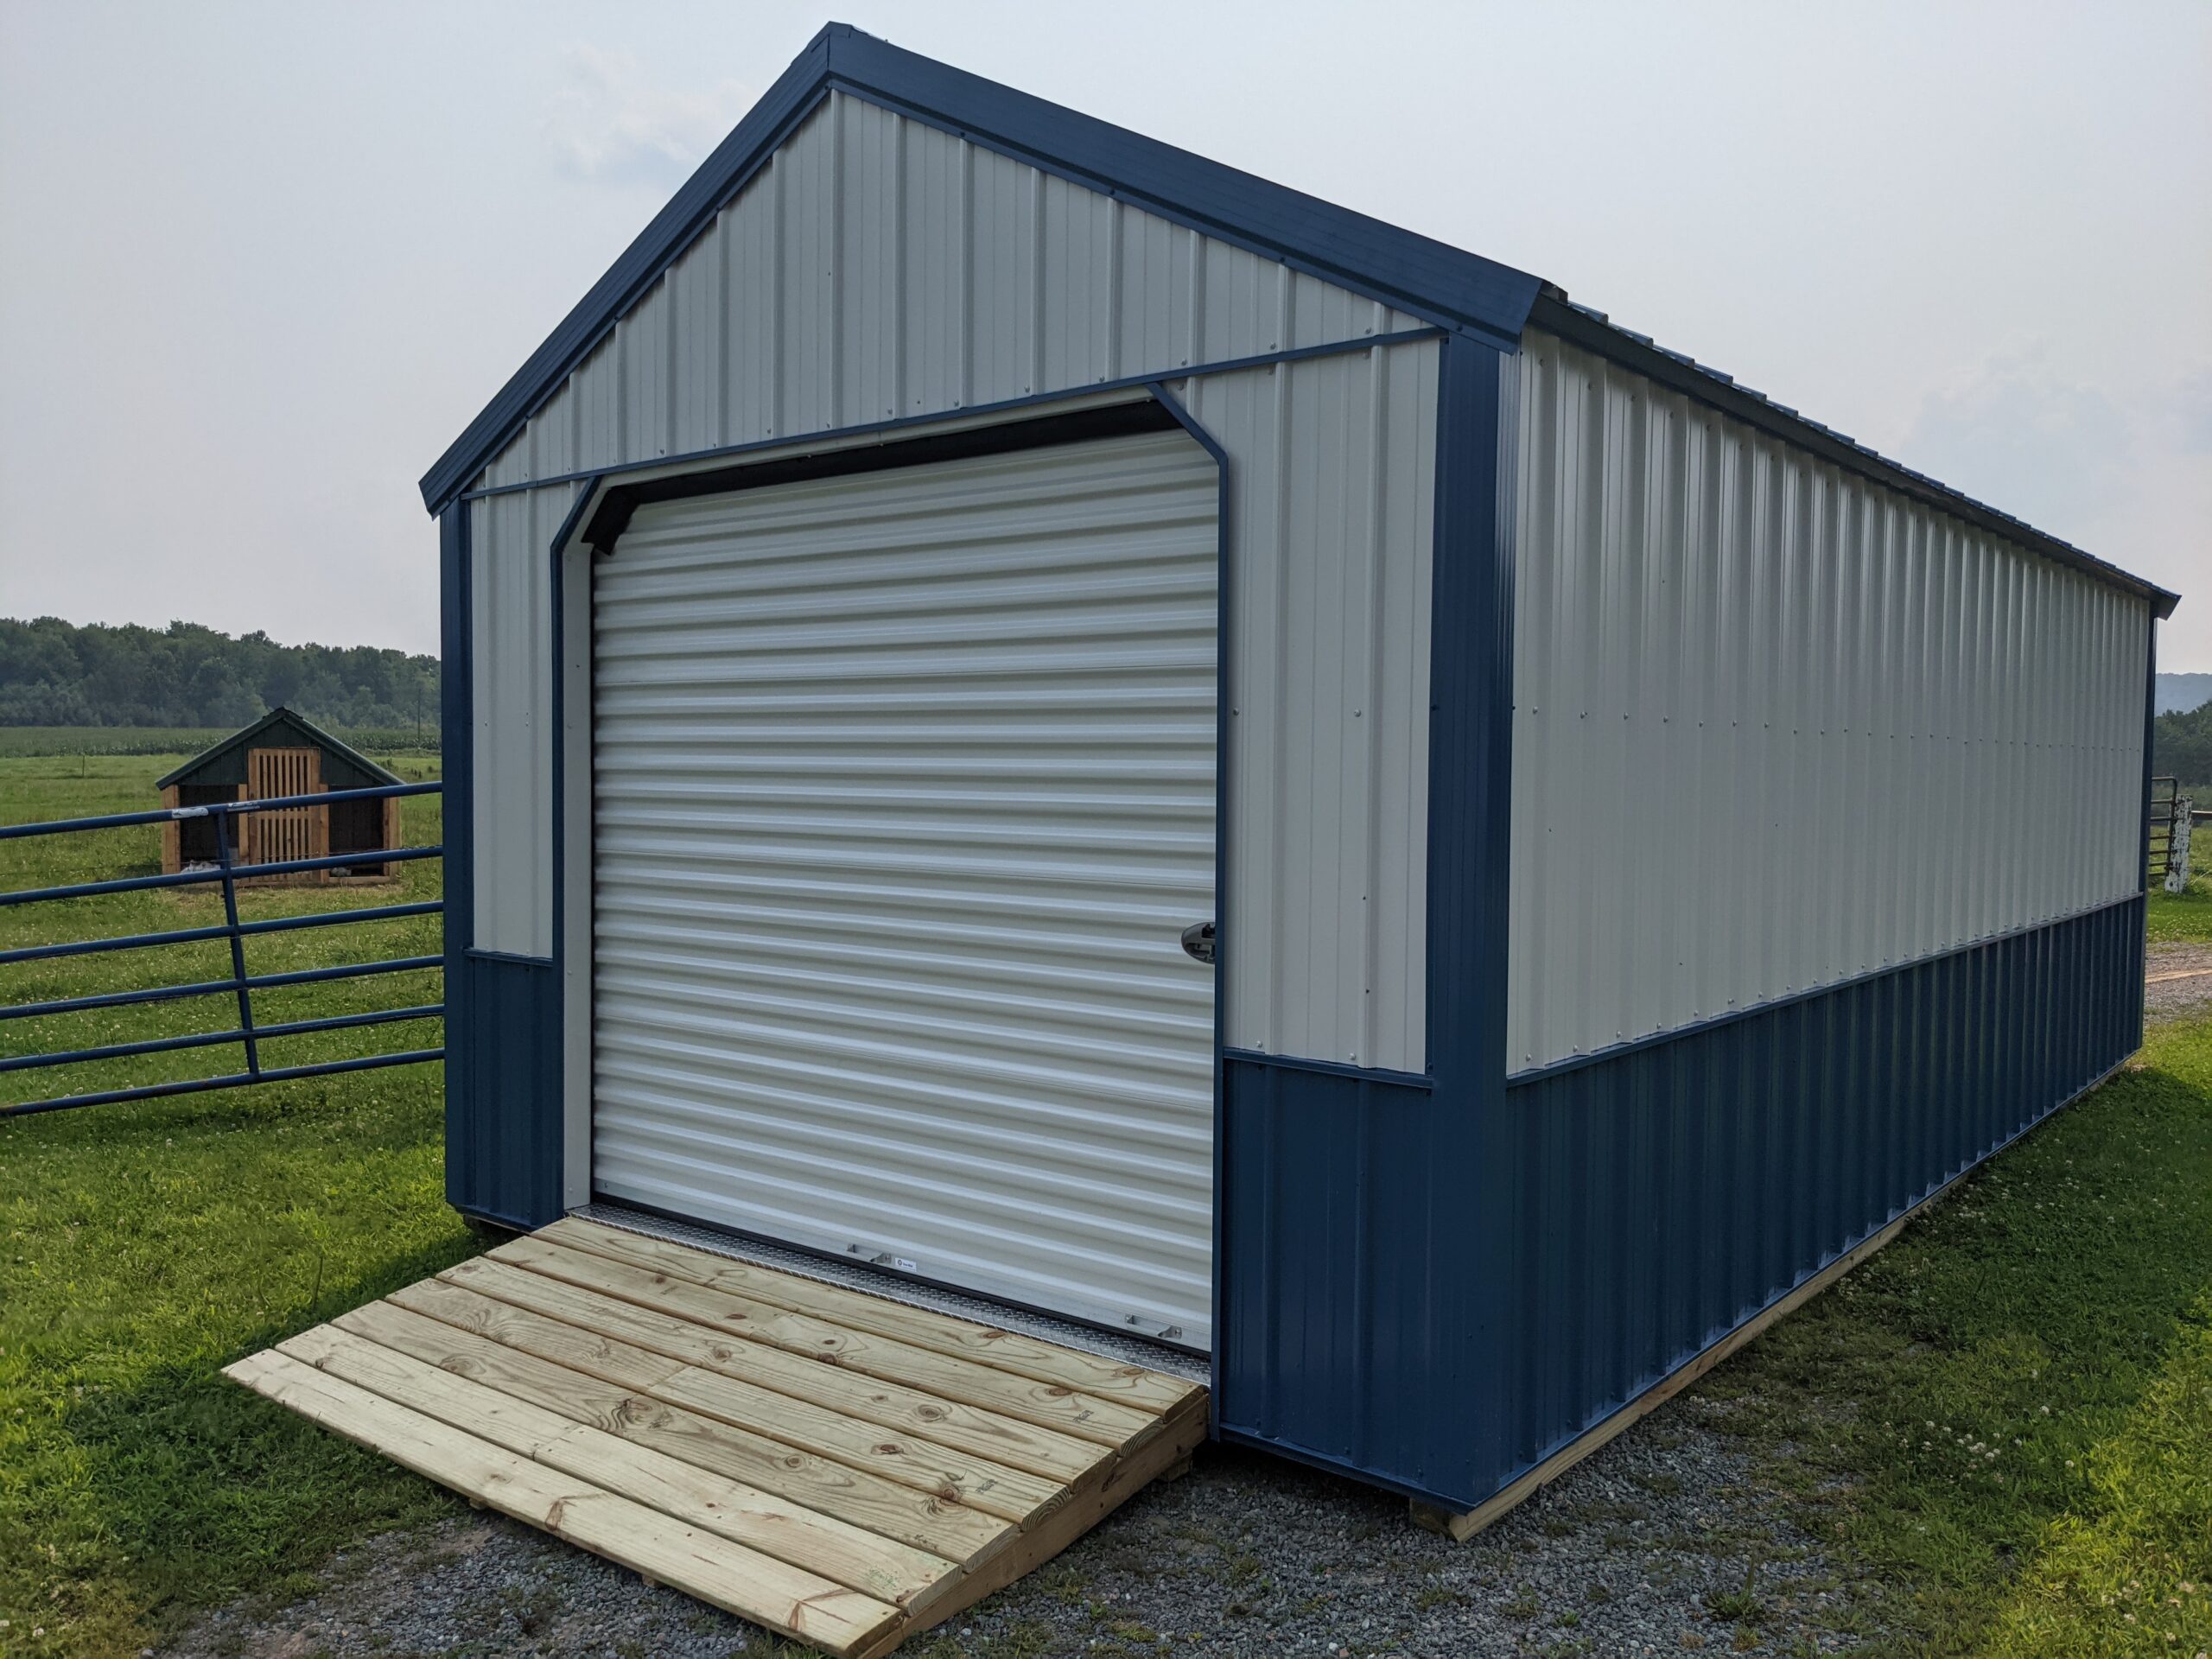 12x24 Metal A-frame white/blue with 8x7 Roll Up Door - Sheds Delivered |  Barns | Cabins | Garages & More